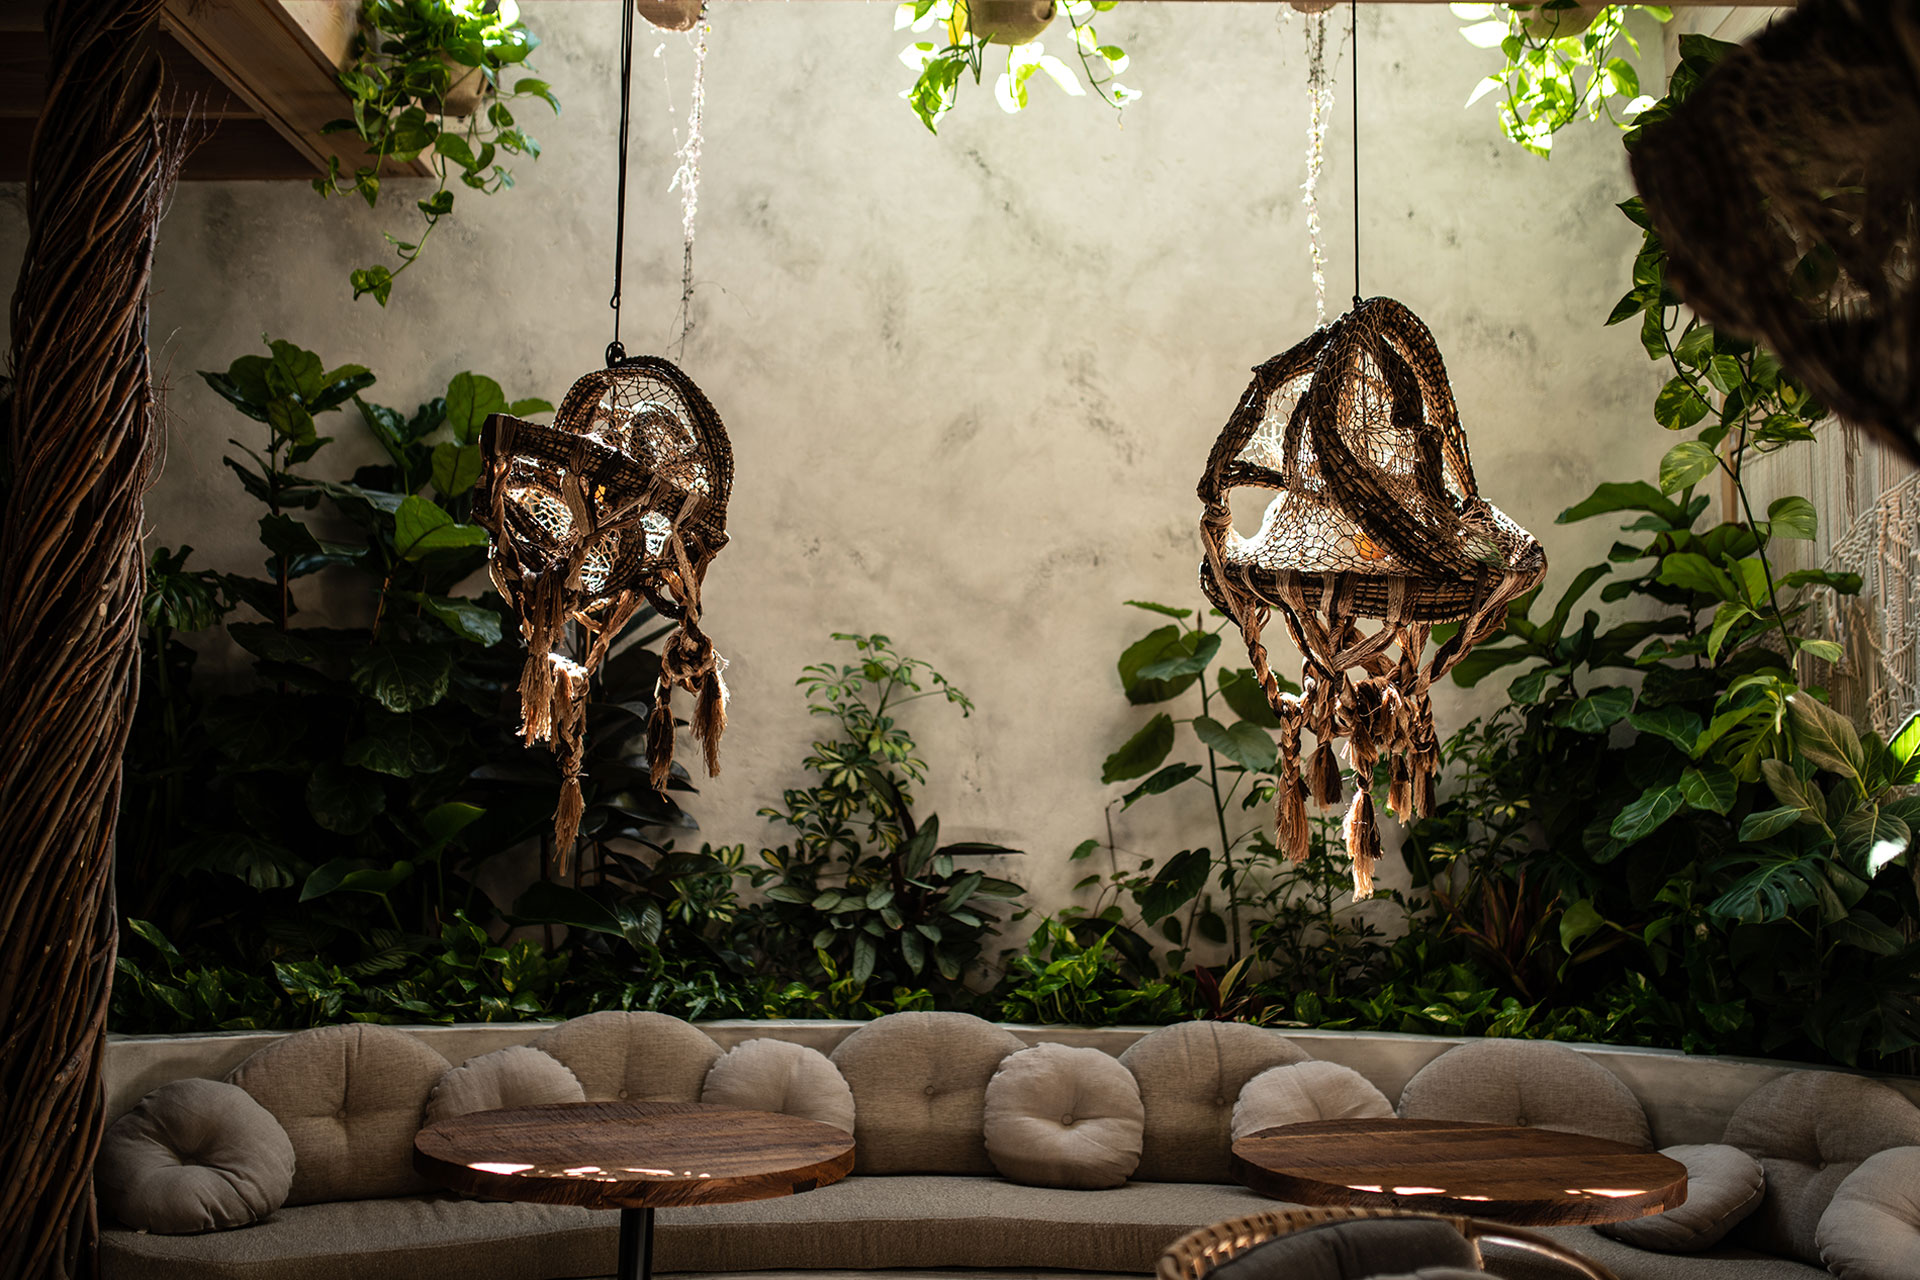 meteora shot of banquette bathed in daylight surrounded by plants and hanging rope-light light fixtures